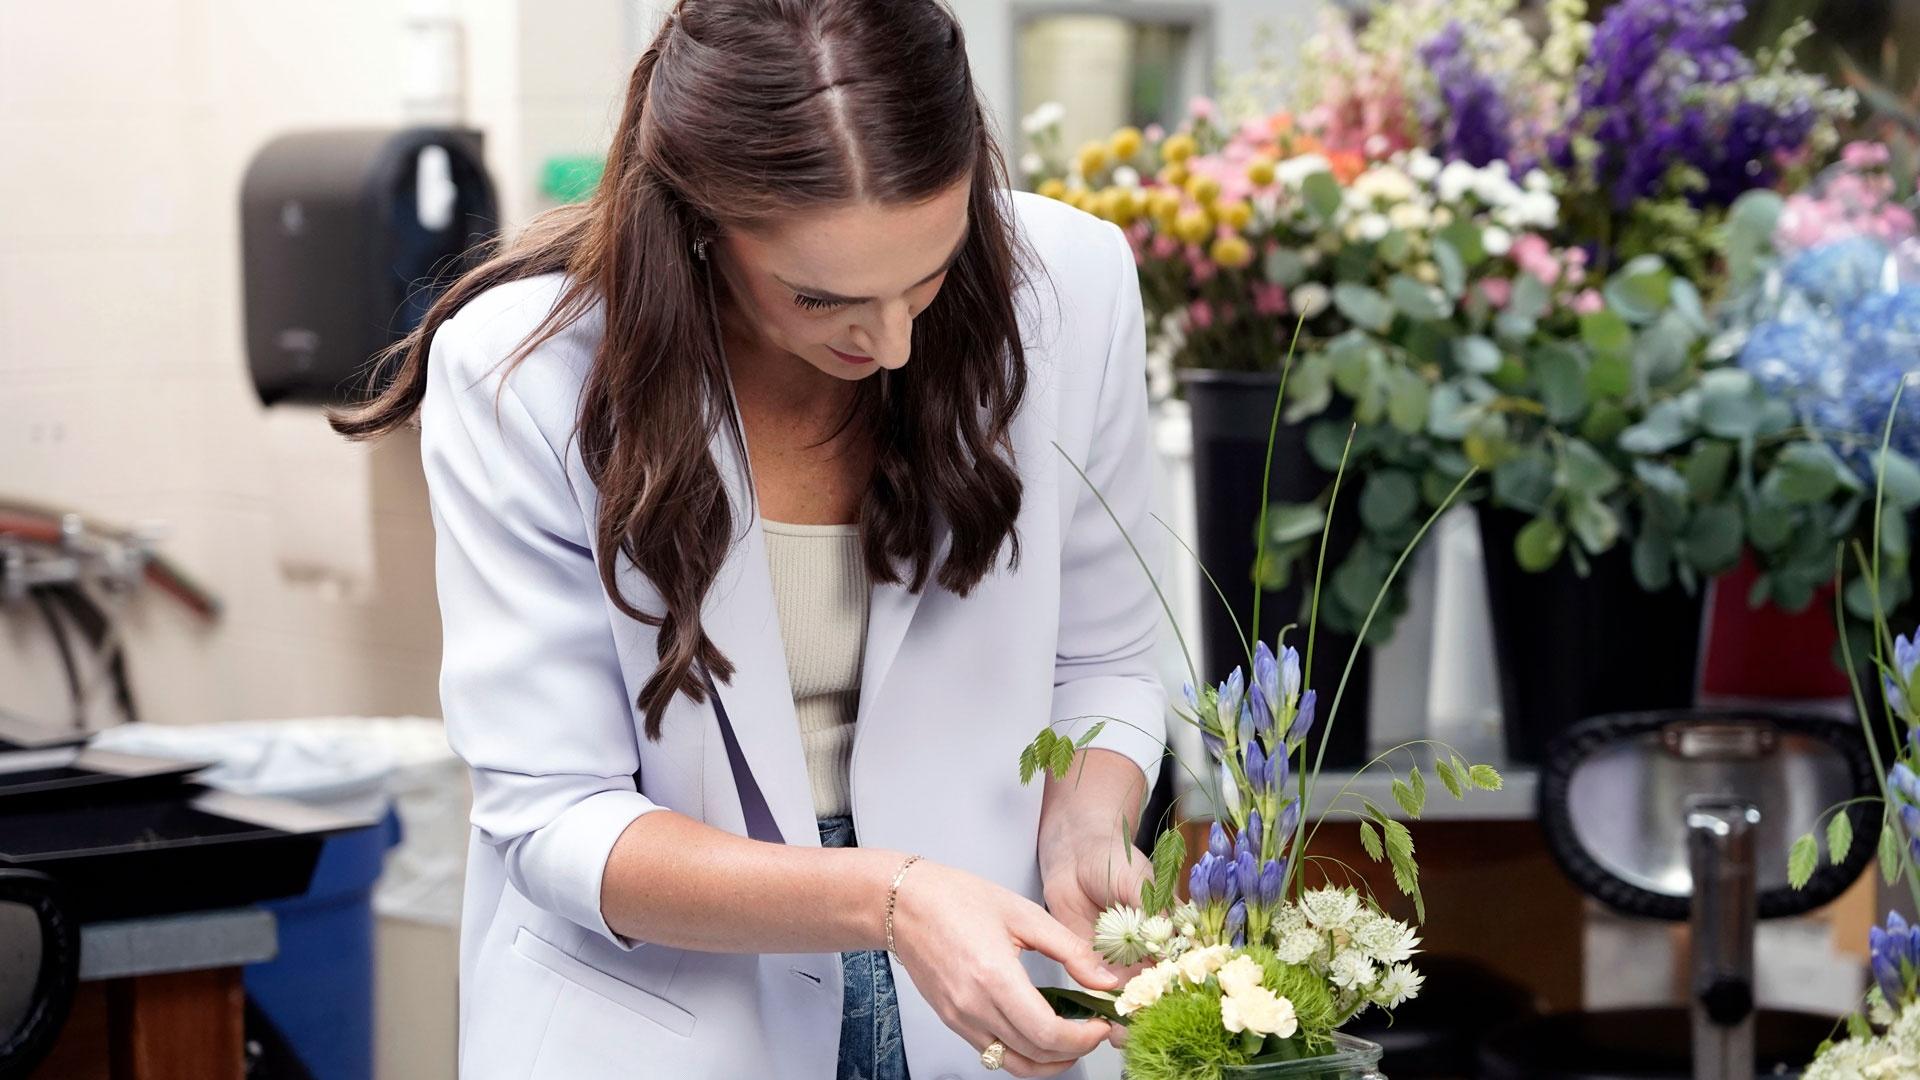 Chelsea Reber works on a floral arrangement, as featured on Season 2 of "Texas A&M Today."